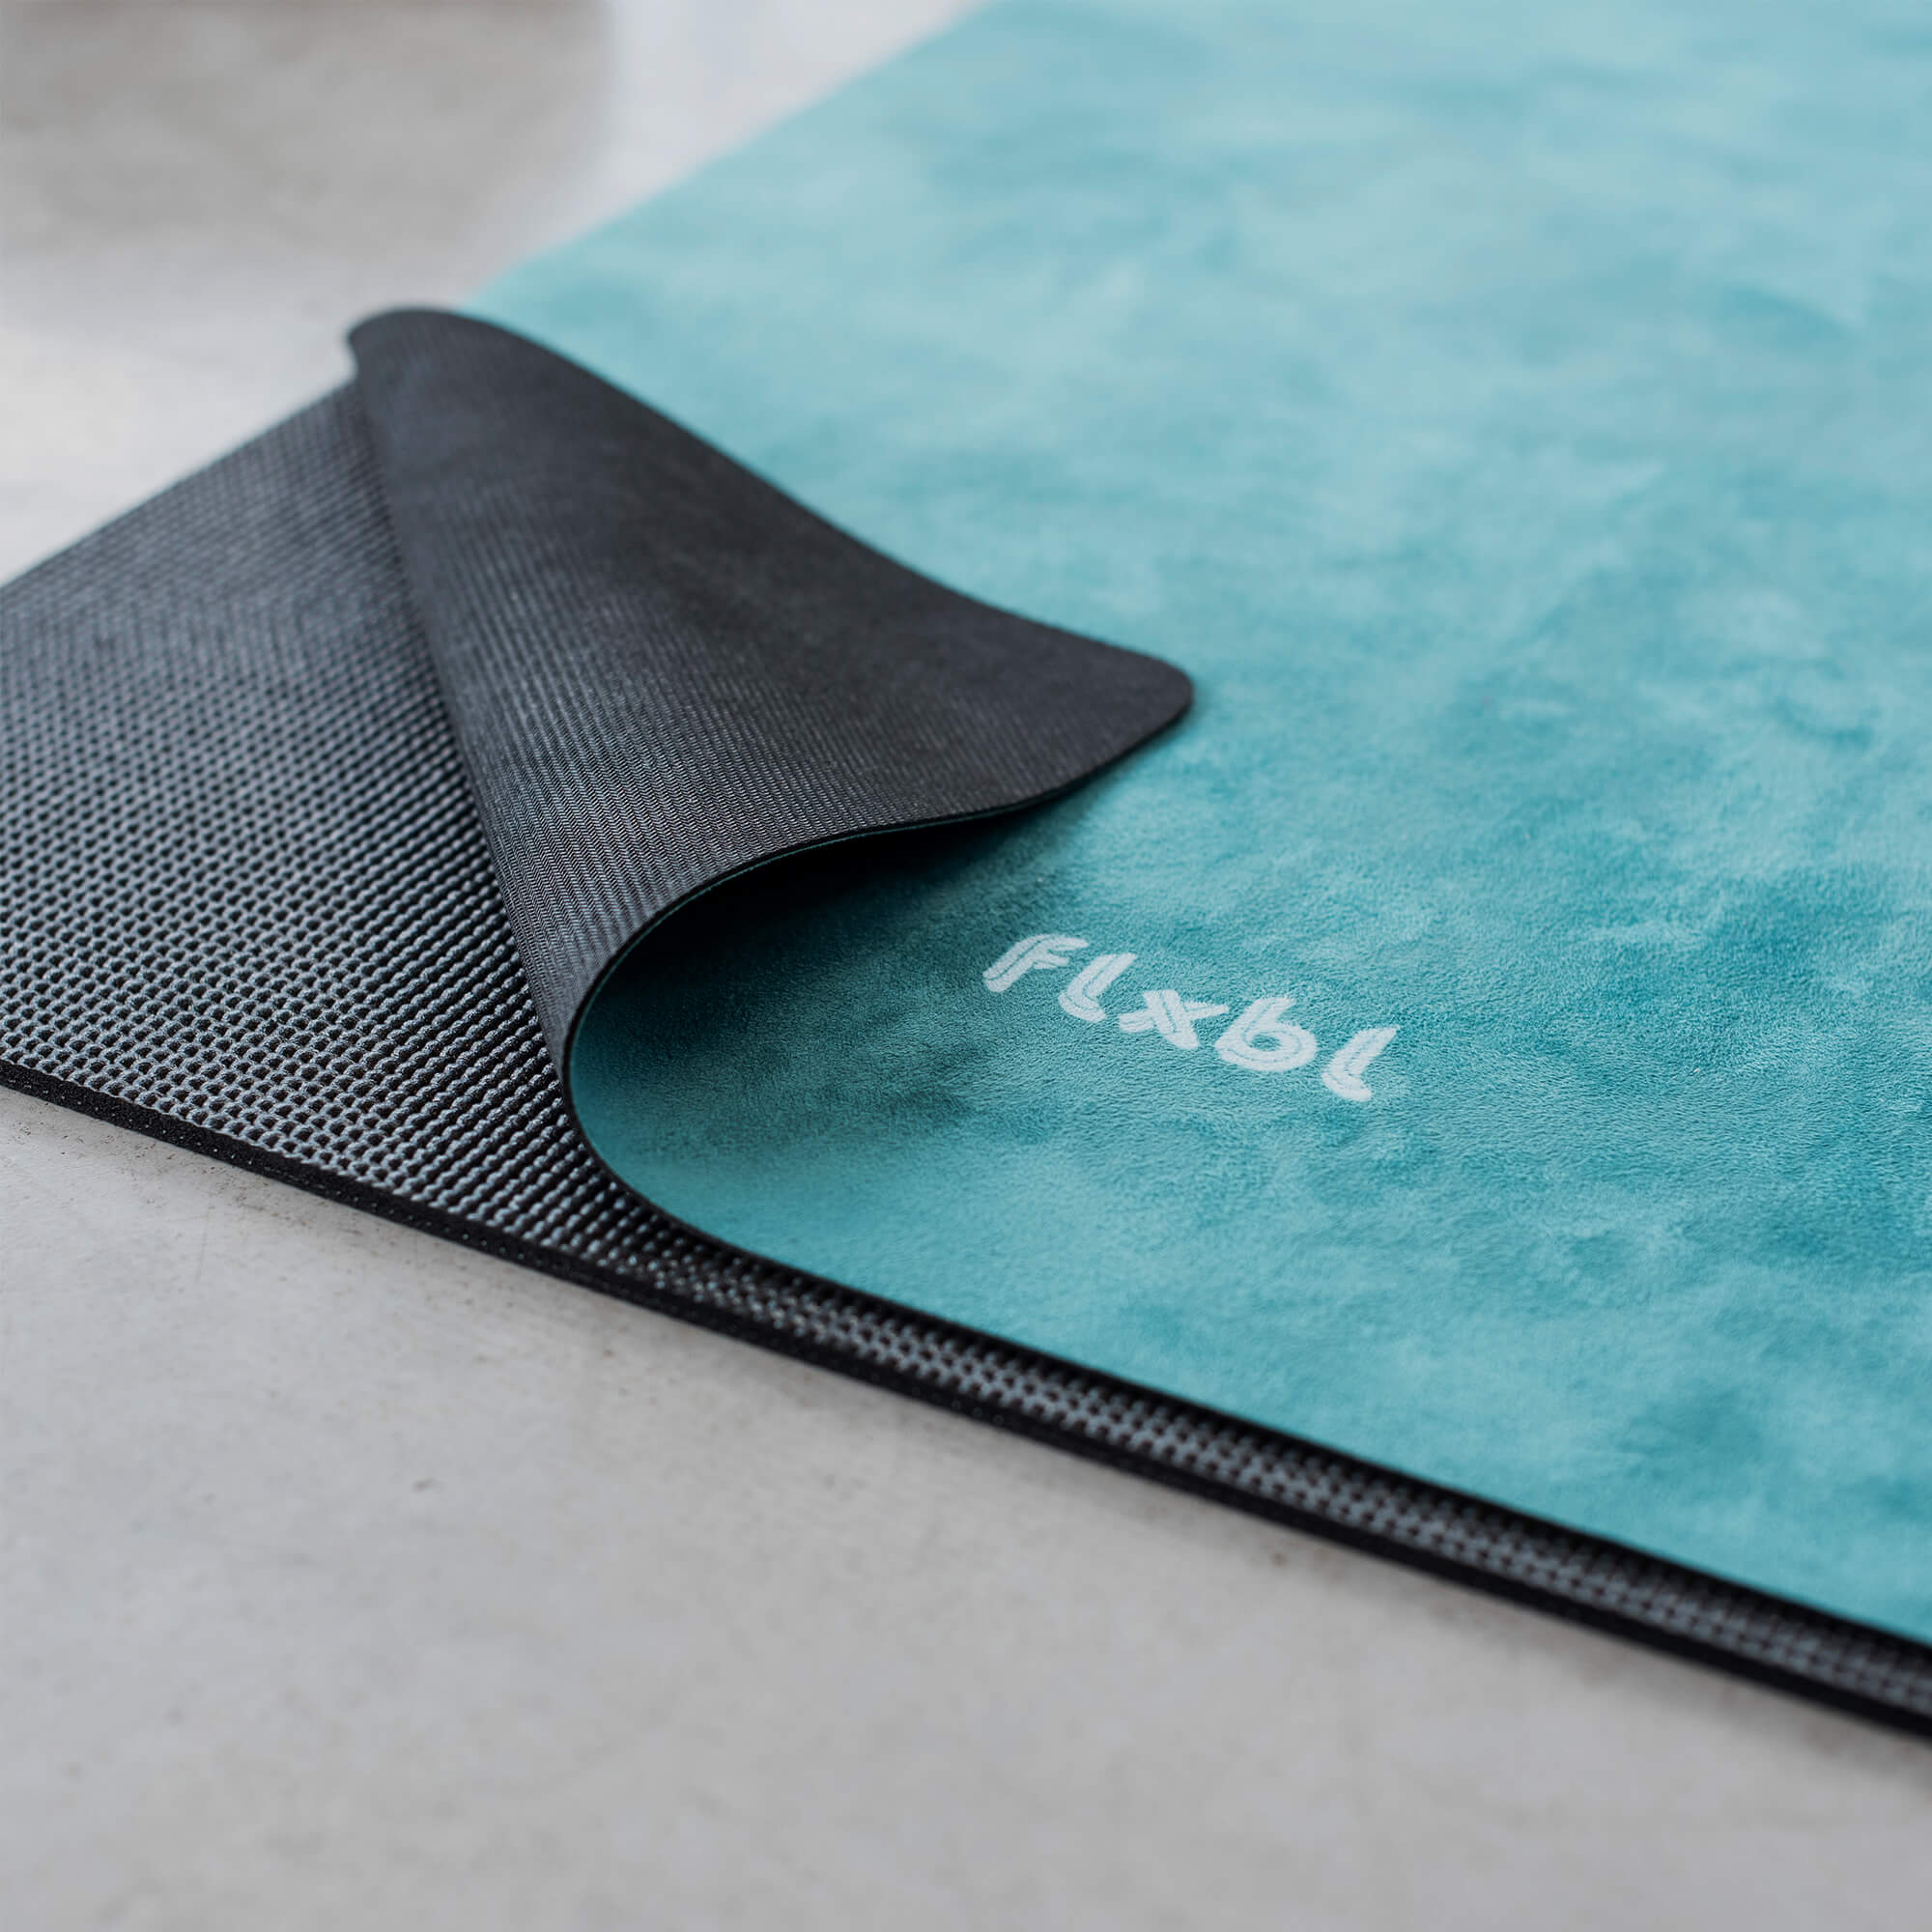 FLXBL Travel Yoga Mat and Luxury Top Layer in One Non Slip and